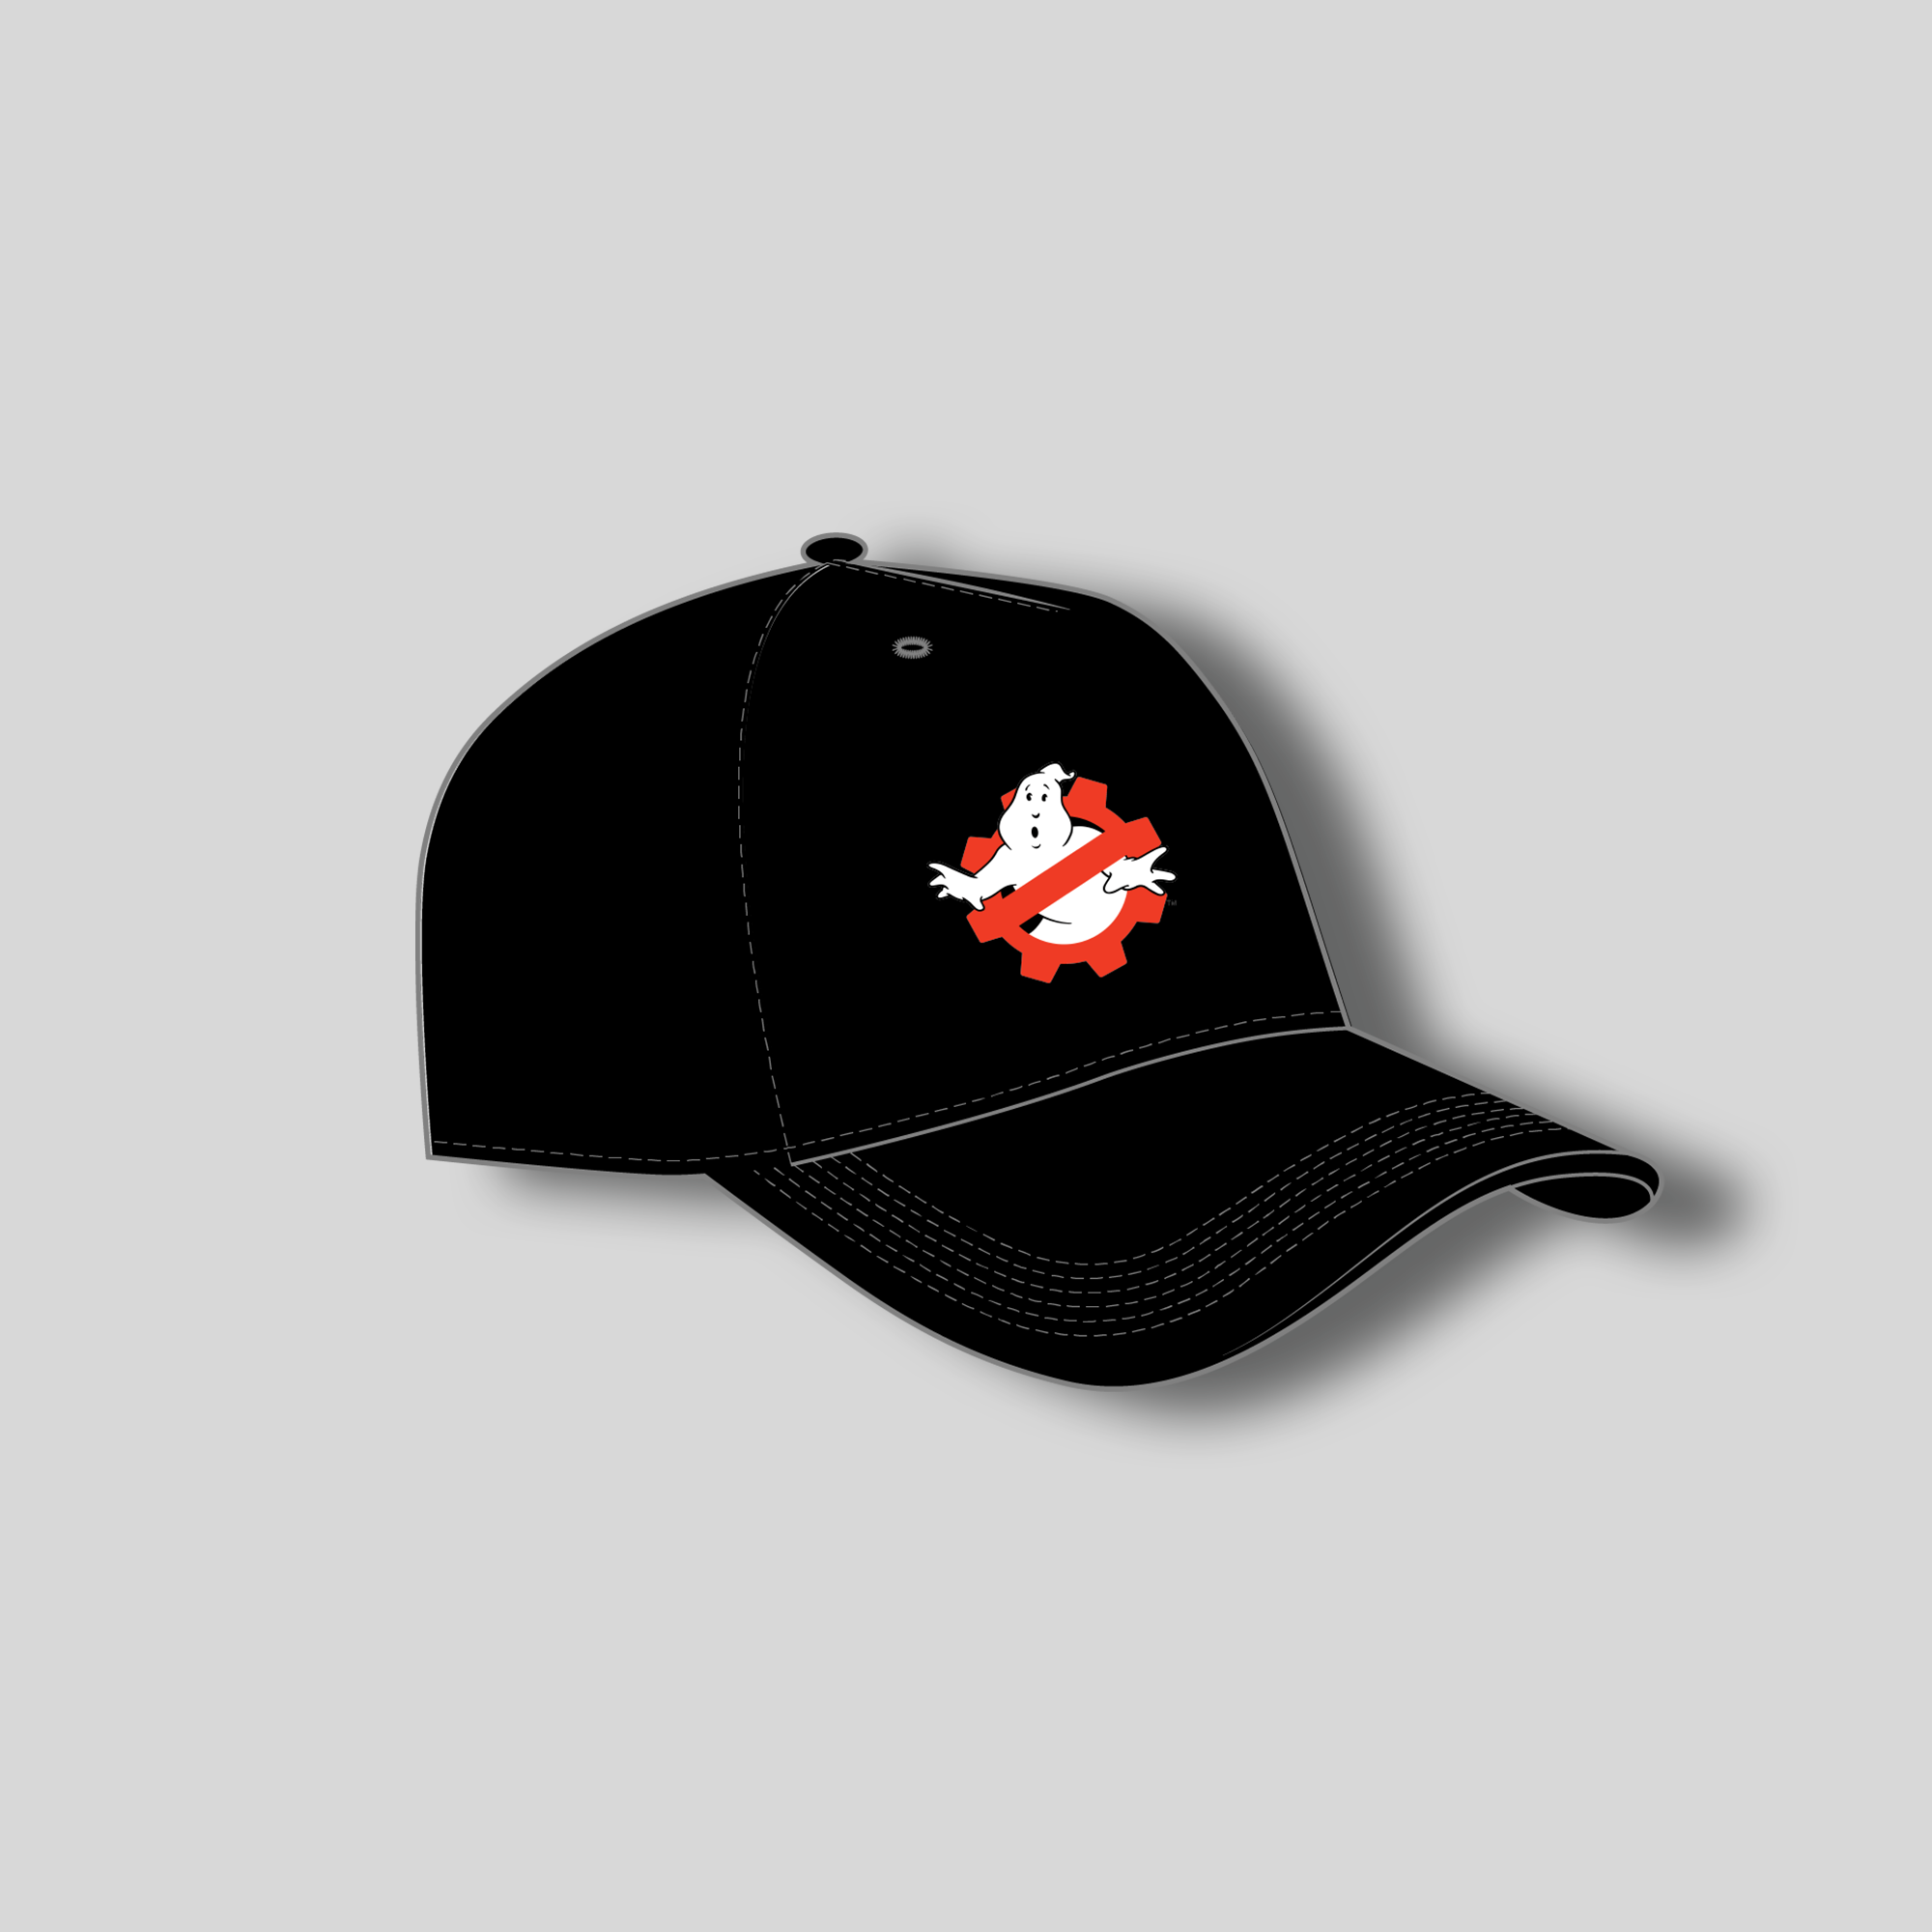 Ghostbusters-ShopifyImages-EngineeringNoGhostKidsBlackCap-R1.png